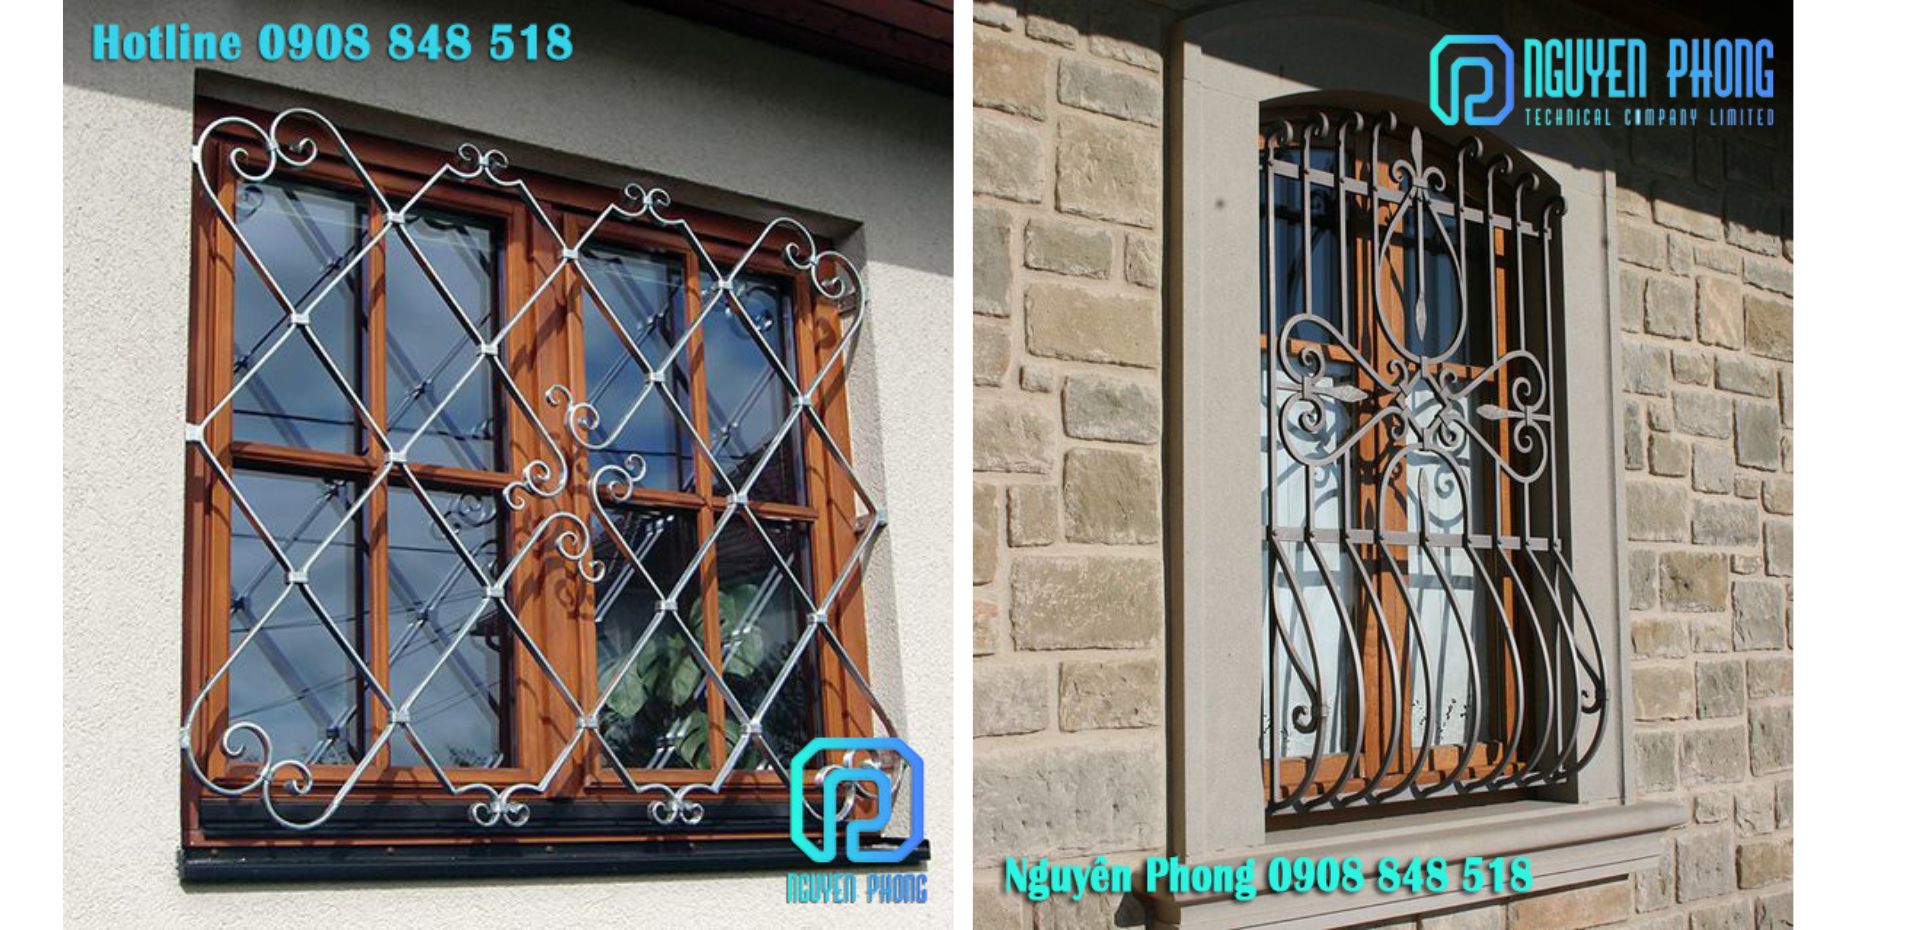 https://nguyenphongcnc.com/assets/images/gallery/wrought-iron grille-window.jpg